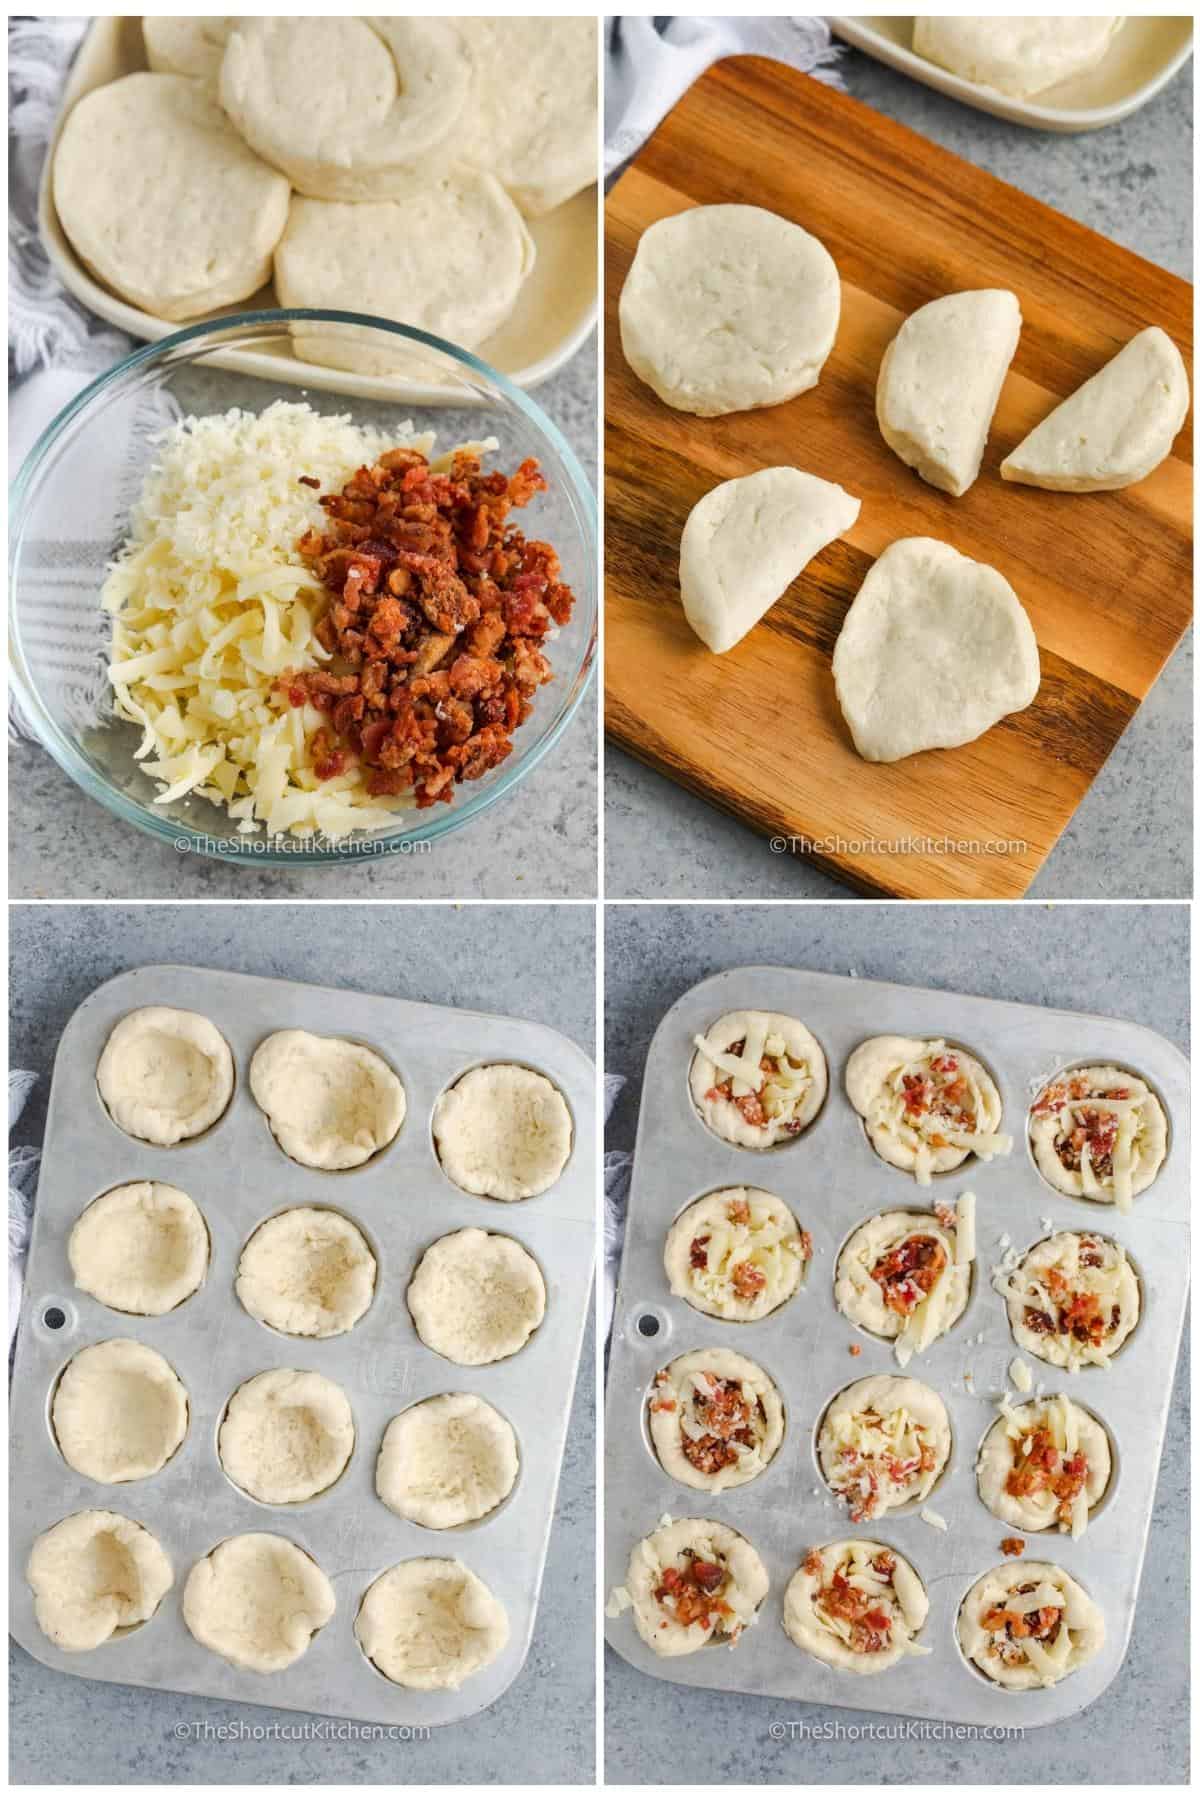 process of adding ingredients together to make Bacon And Cheese Biscuits